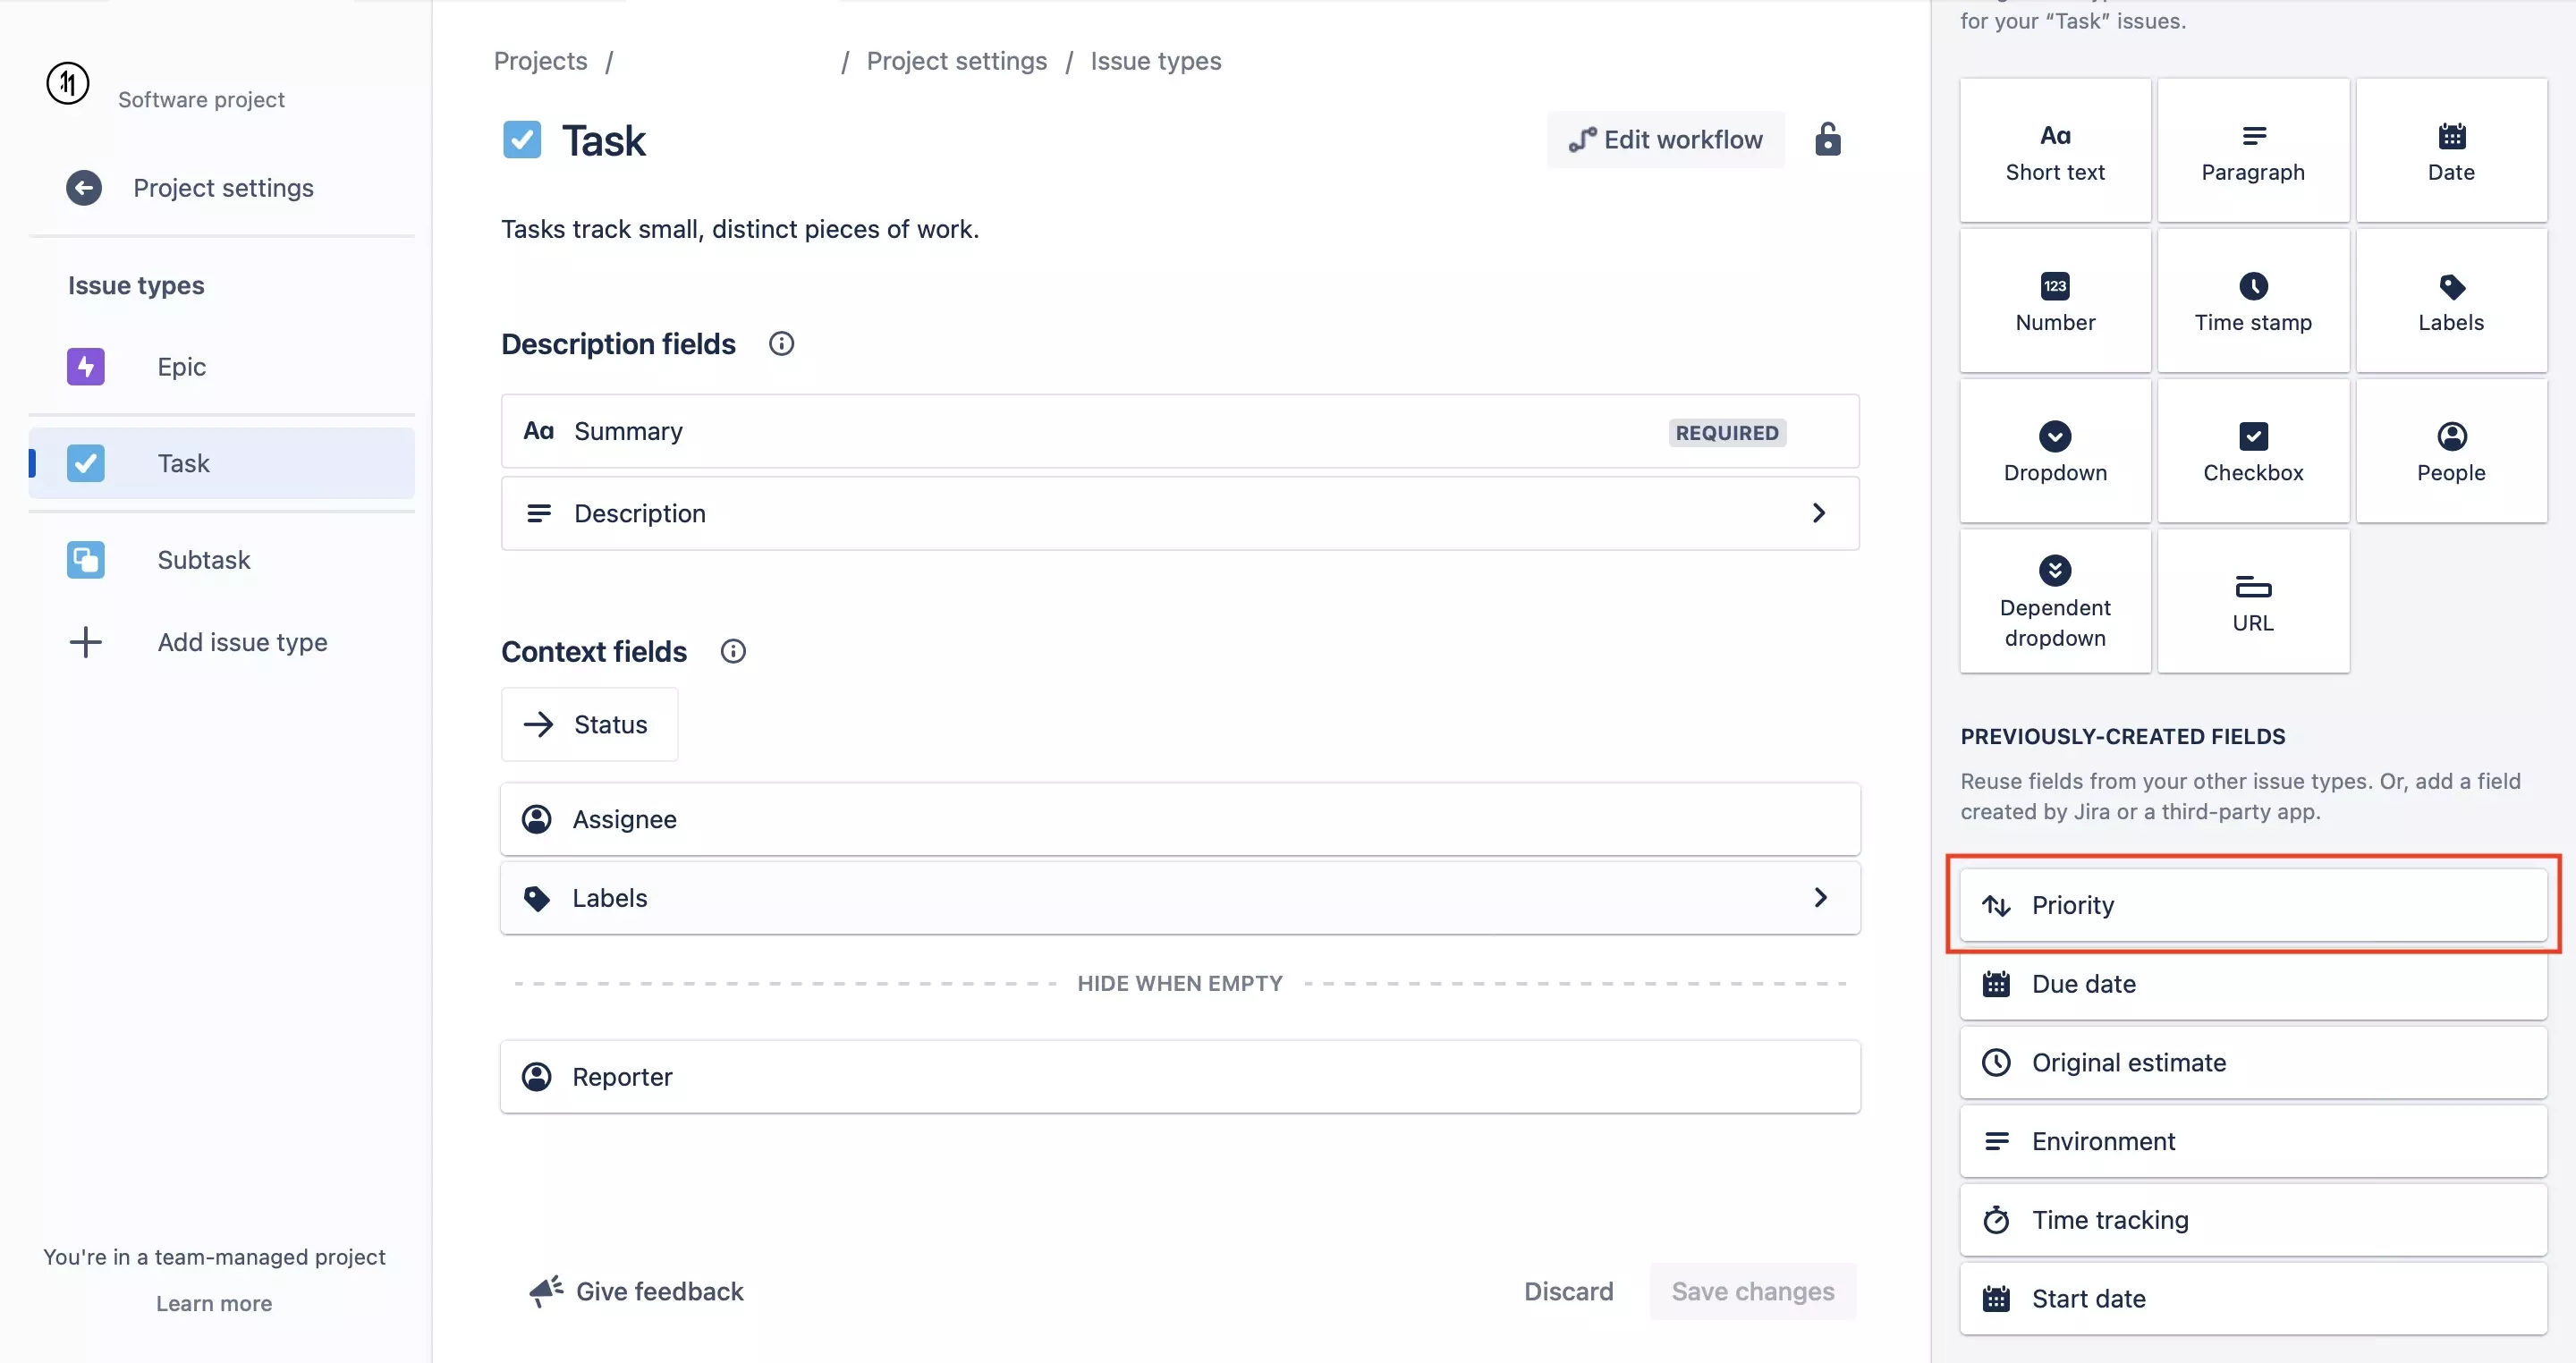 A screenshot of JIRA showing you where priority is found within the Task Issue Type.